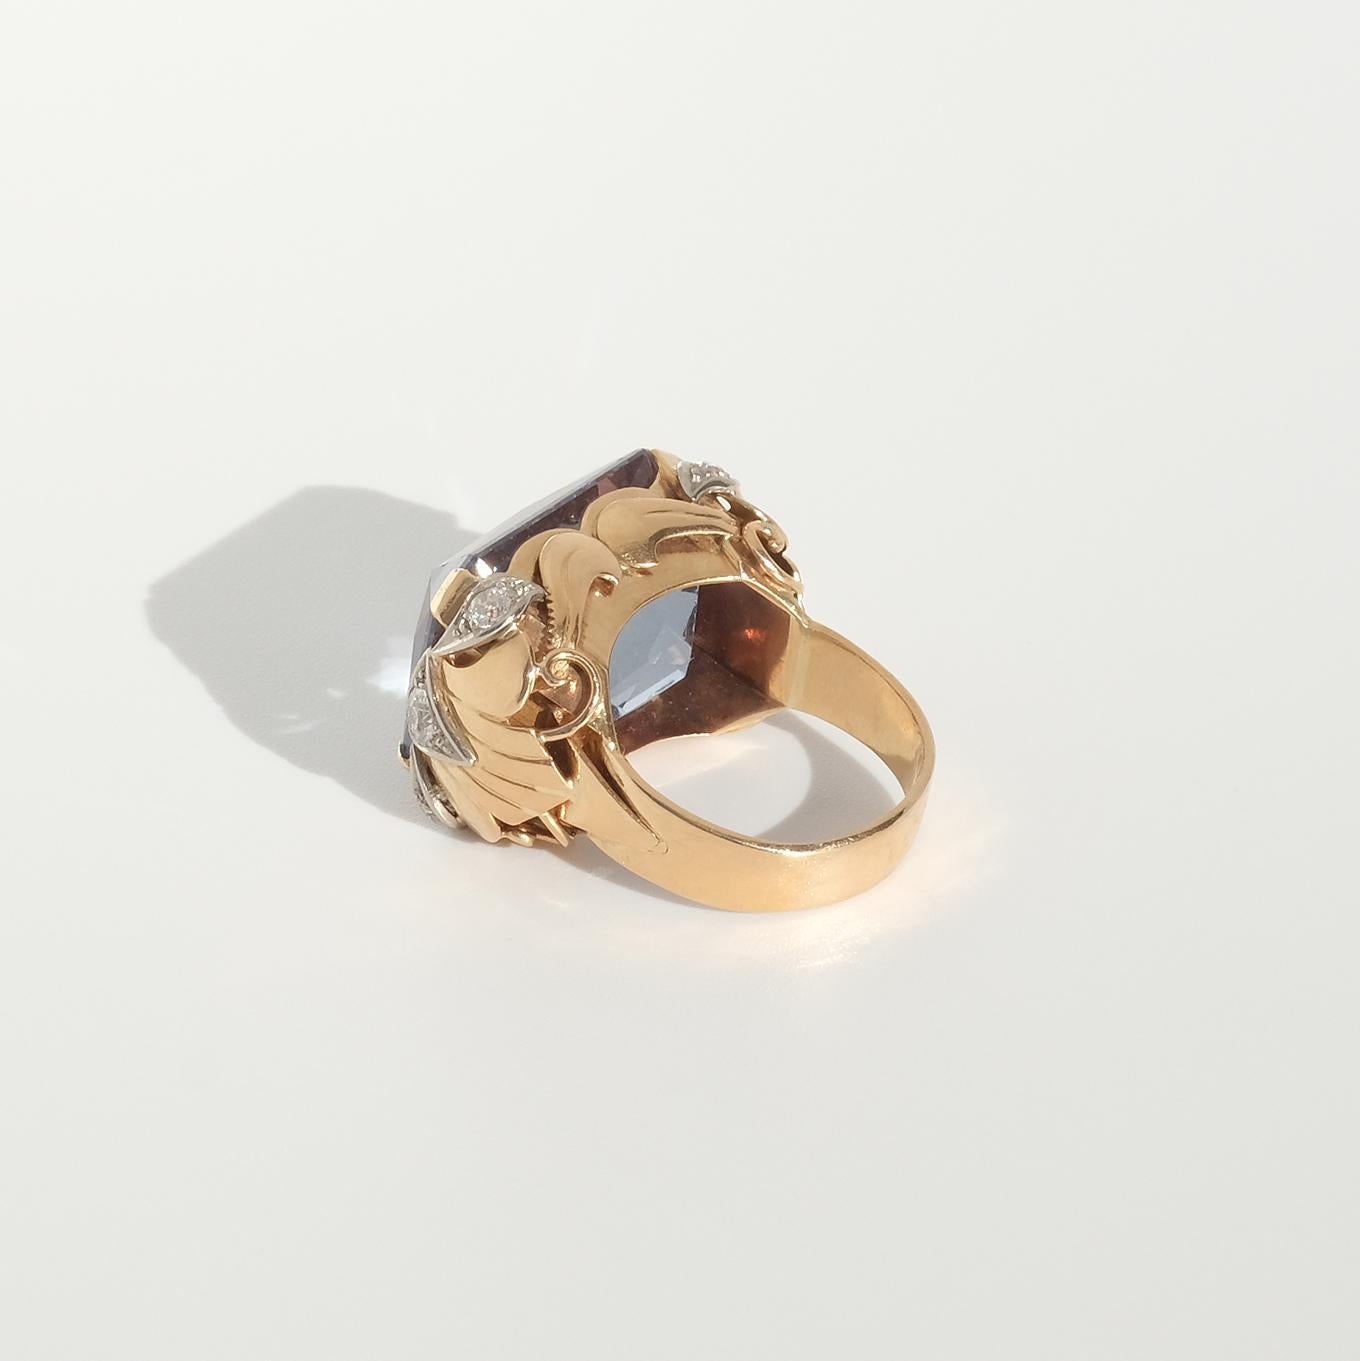 Old European Cut 18 karat gold ring with a large synthetic spinel and diamonds.